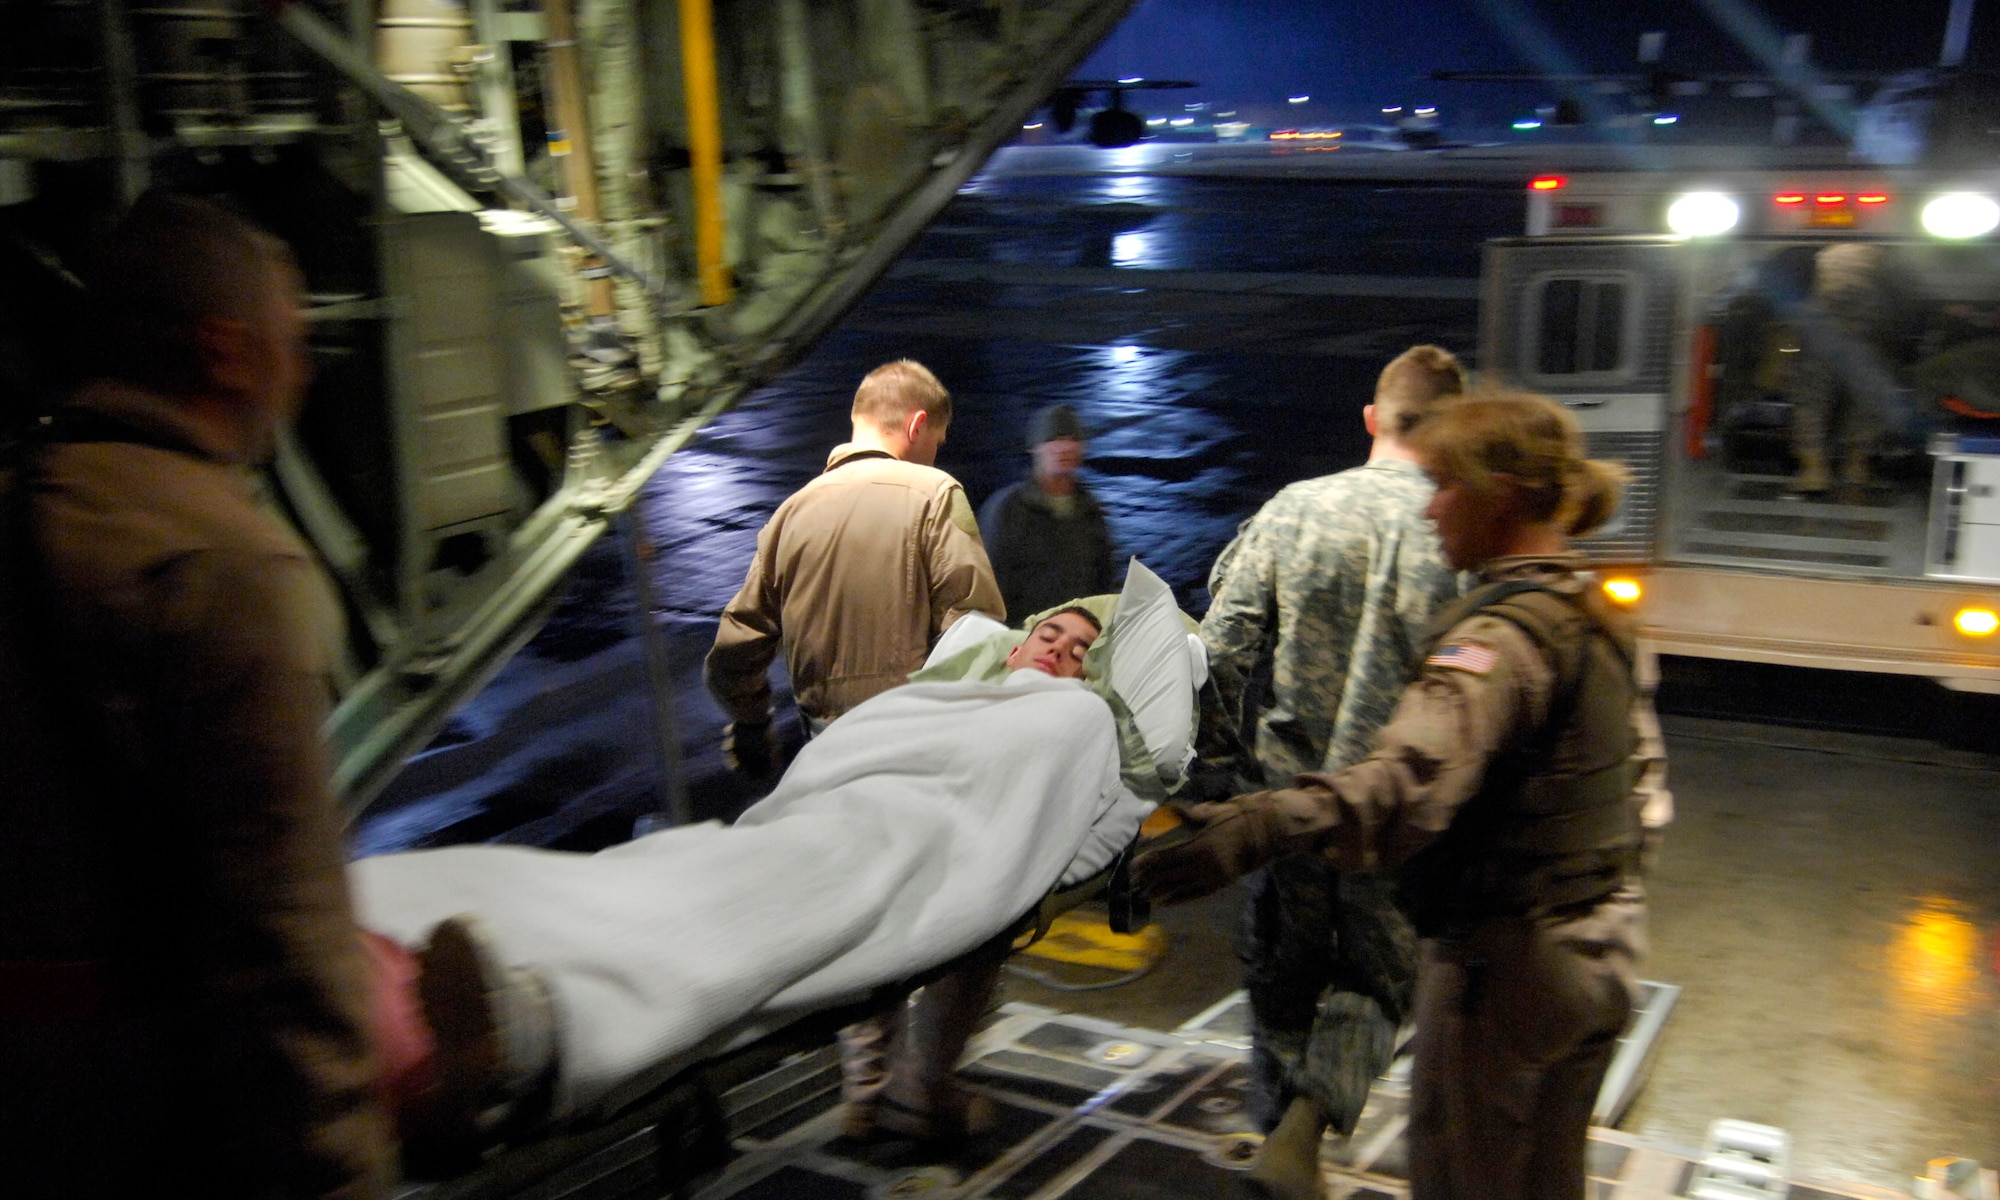 Members of the 455th Aeromedical Evacuation Flight carry Airman 1st Class Brent Noah to an ambulance at Bagram Airfield, Afghanistan, March 26.  Airman Noah, assigned to the 376th Expeditionary Aircraft Maintenance Squadron at Manas Air Base, Kyrgyzstan, dislocated his hip and was being flown to Bagram Airfield for treatment.  (U.S. Air Force photo/Senior Airman Erik Cardenas)